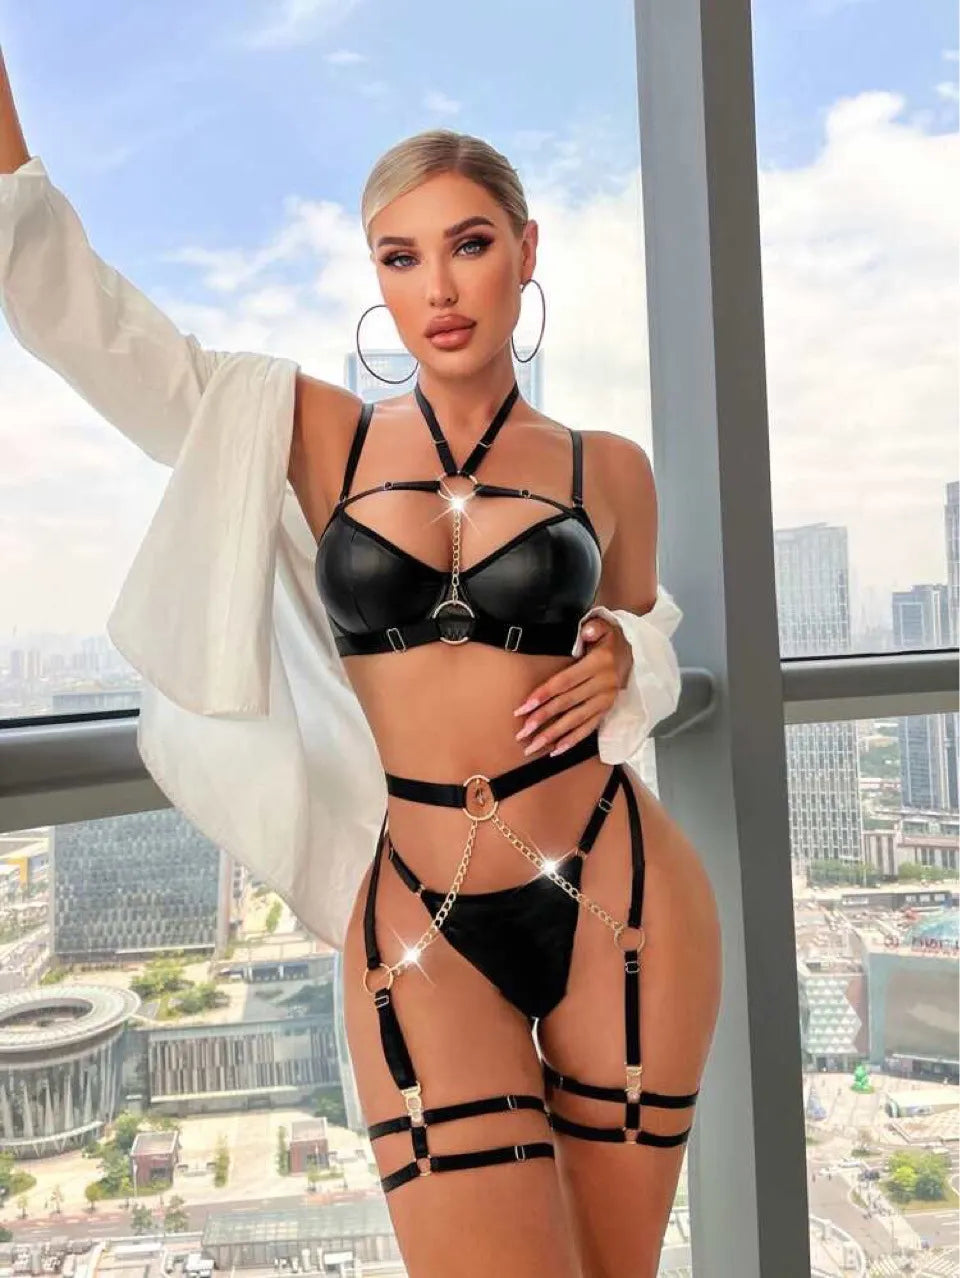 Latex Lingerie  Leather Underwear For Women Halter Bra Bra And Panty Set Sexy PVC Outfit With Chain 4-Piece